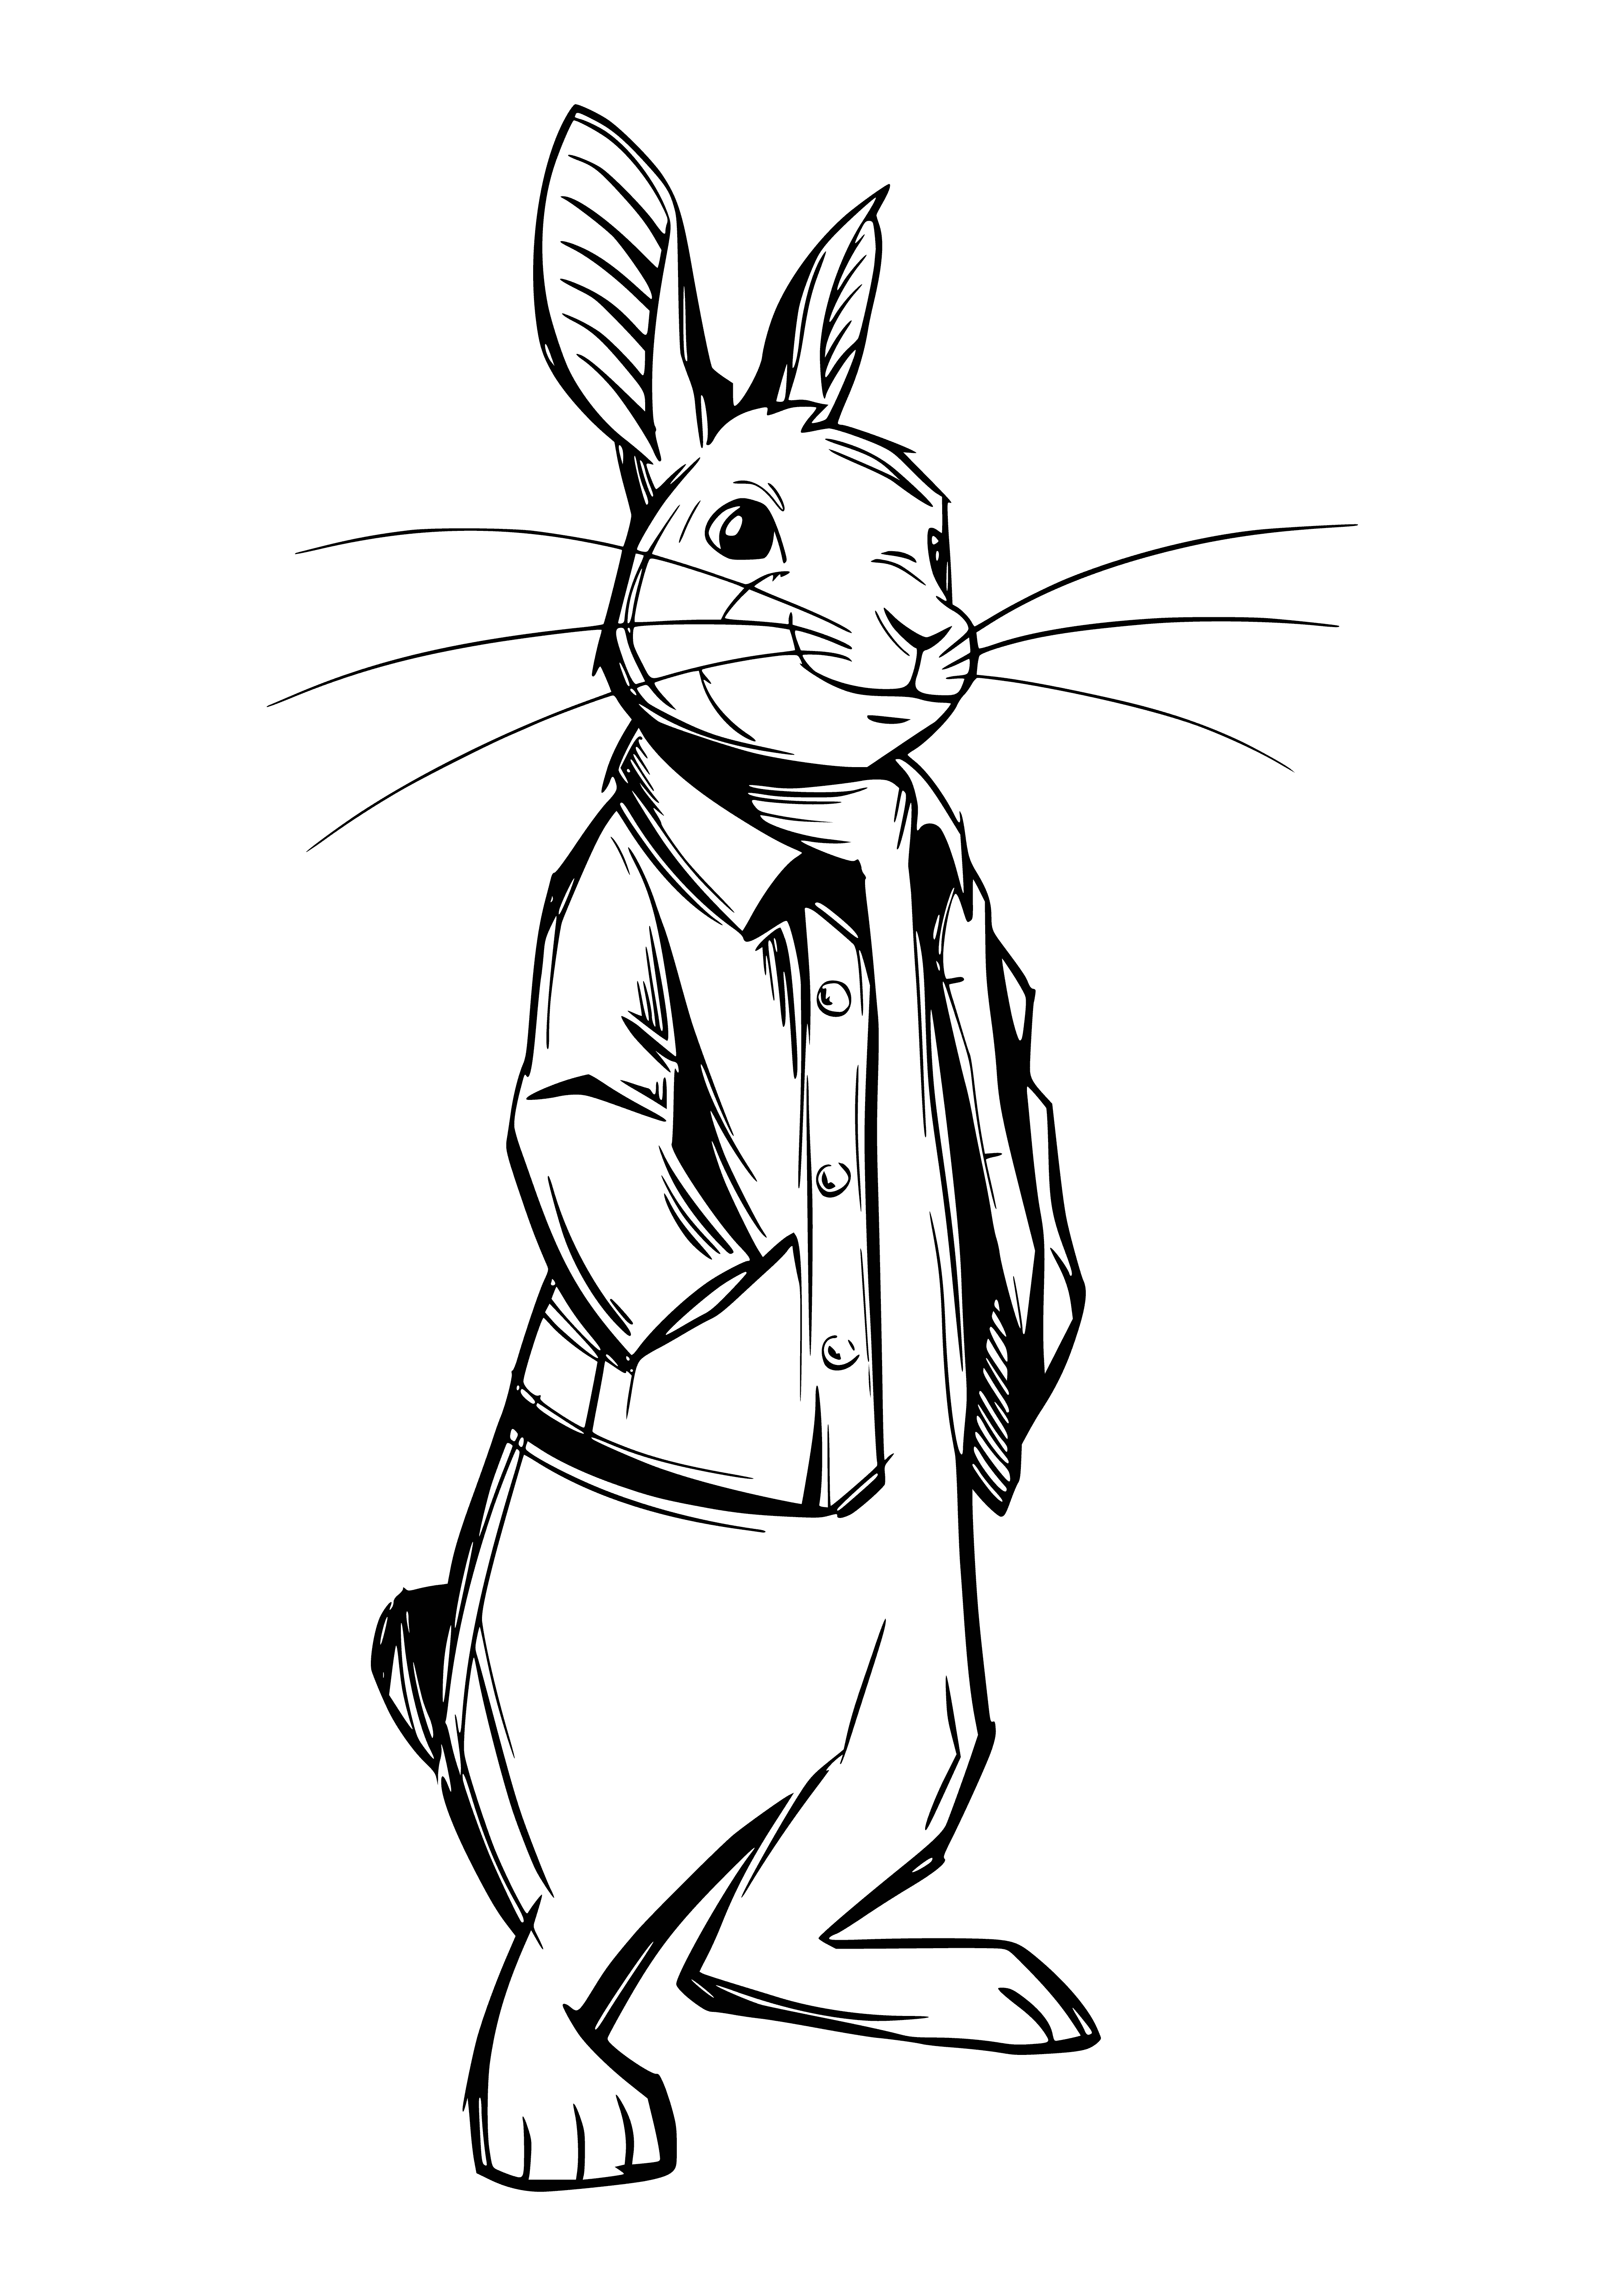 coloring page: Rabbit wearing blue coat & holding a black umbrella stands on hind legs, looking to side. #ColoringPages